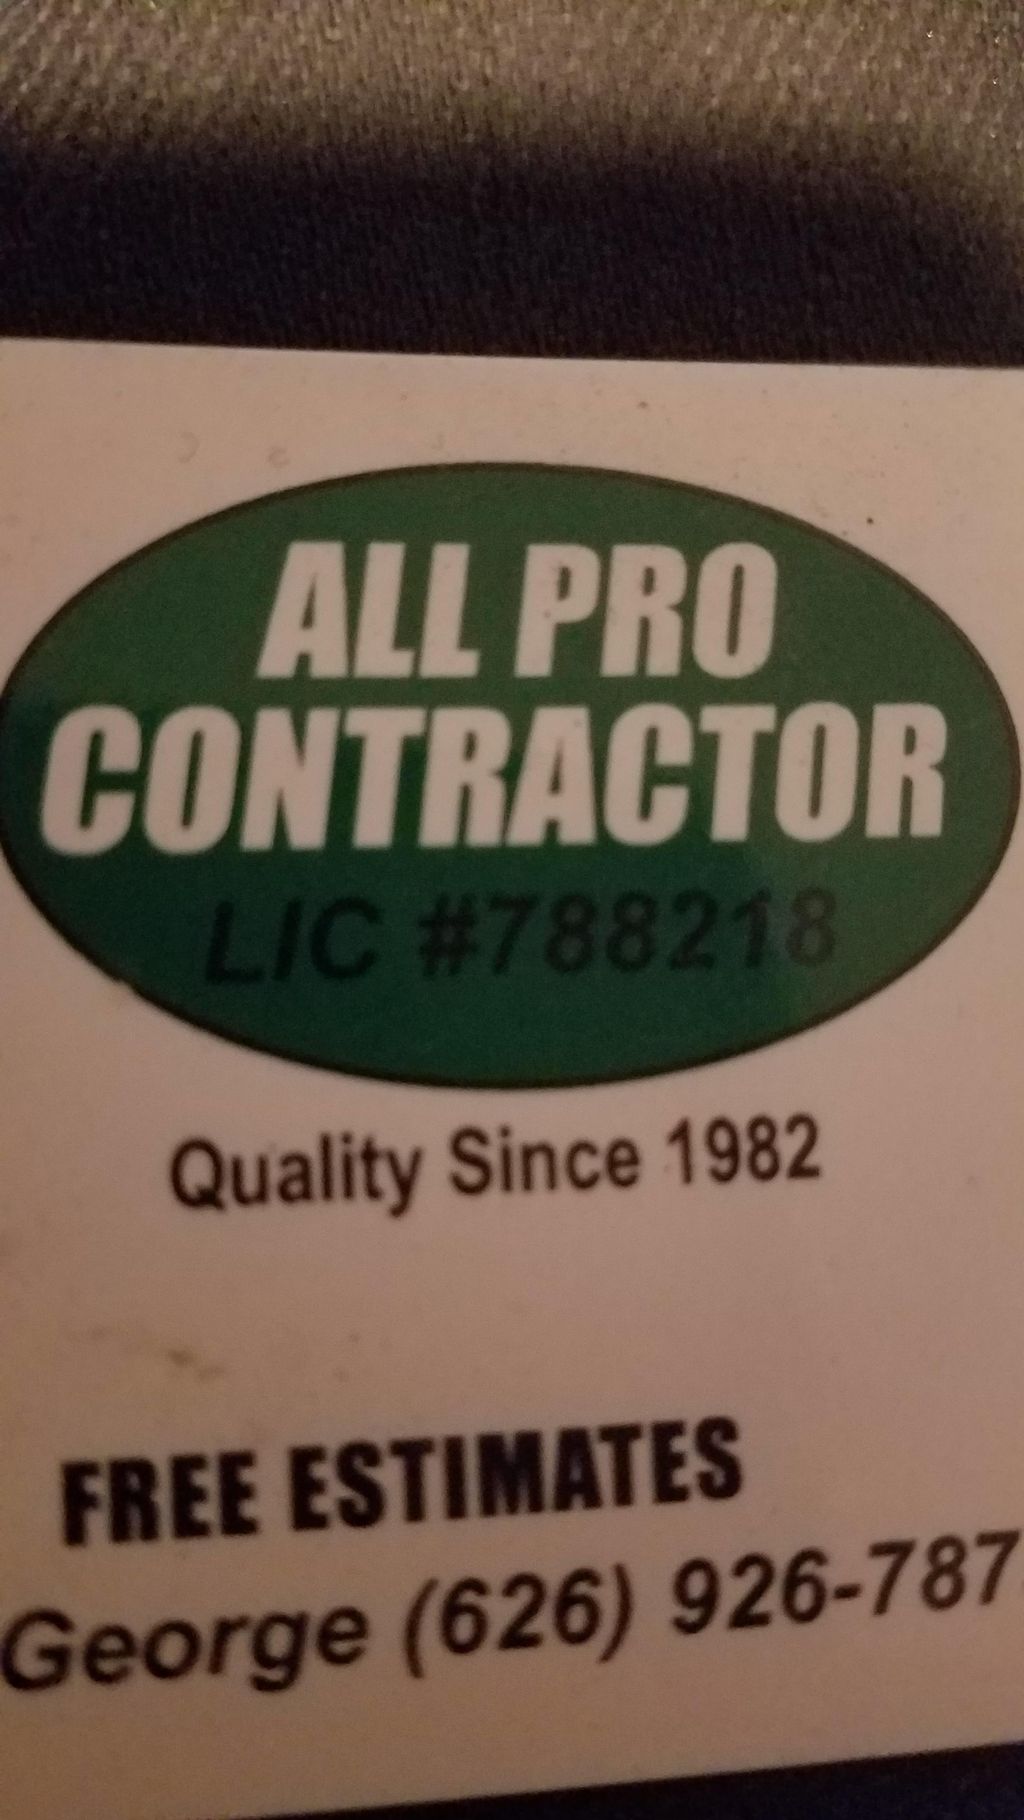 All Pro Contractor